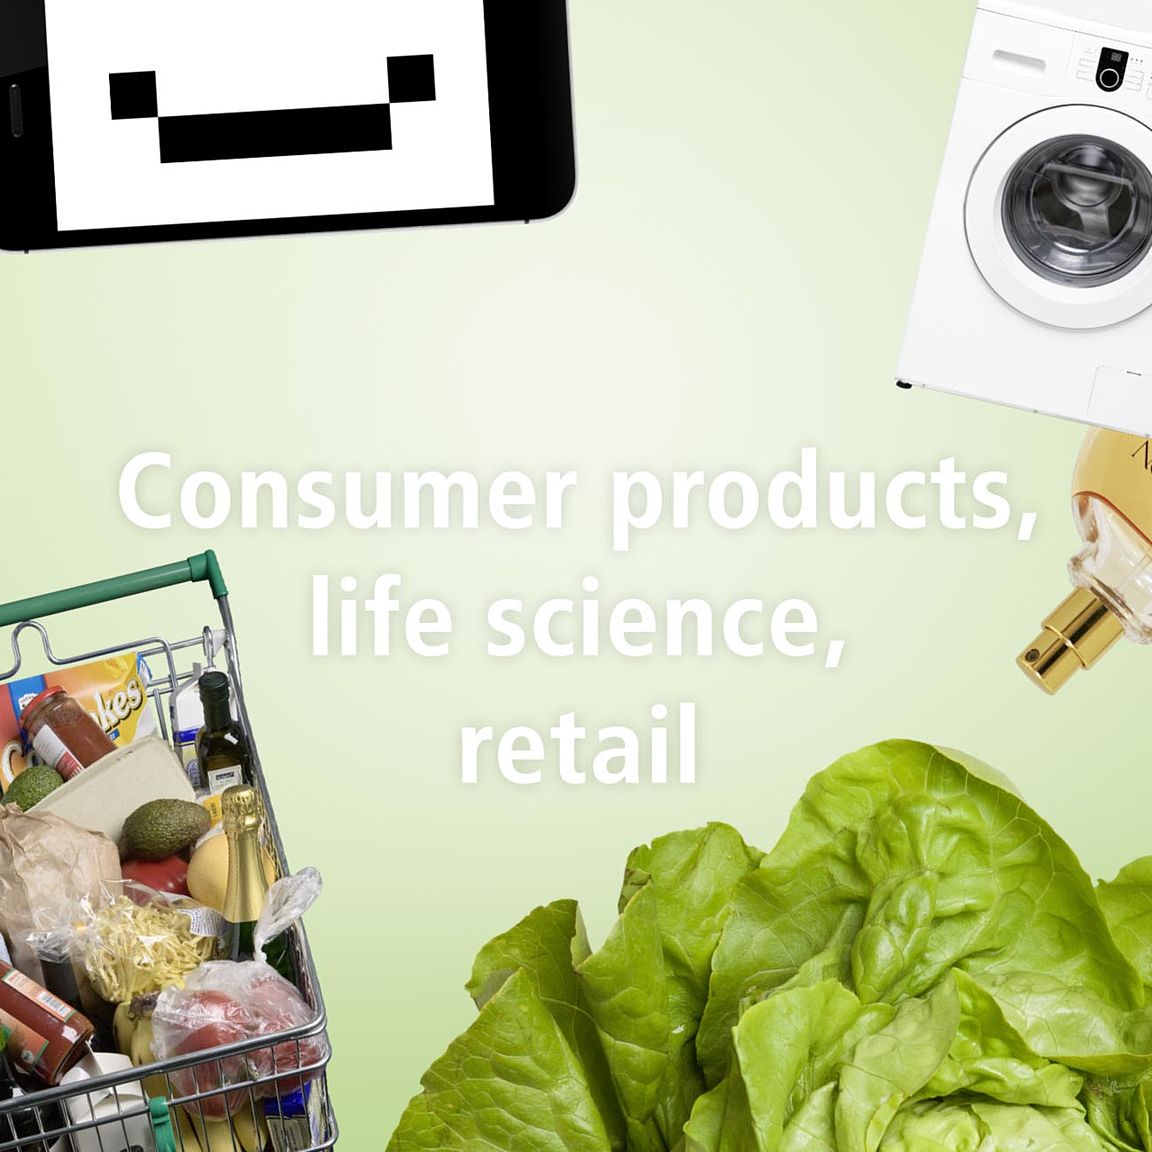 Consumer products, life science, retail